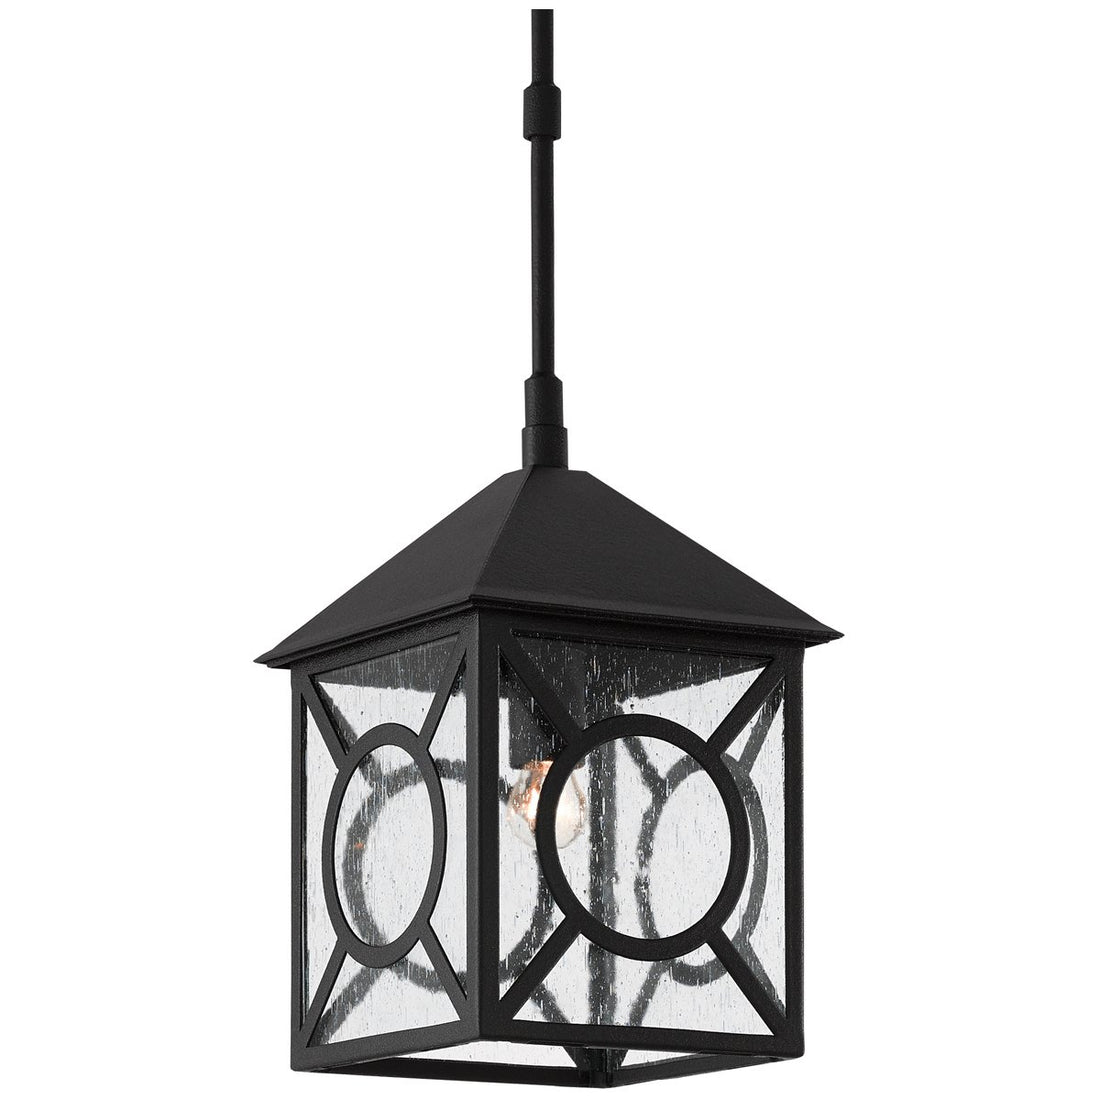 Currey and Company Ripley Small Outdoor Lantern